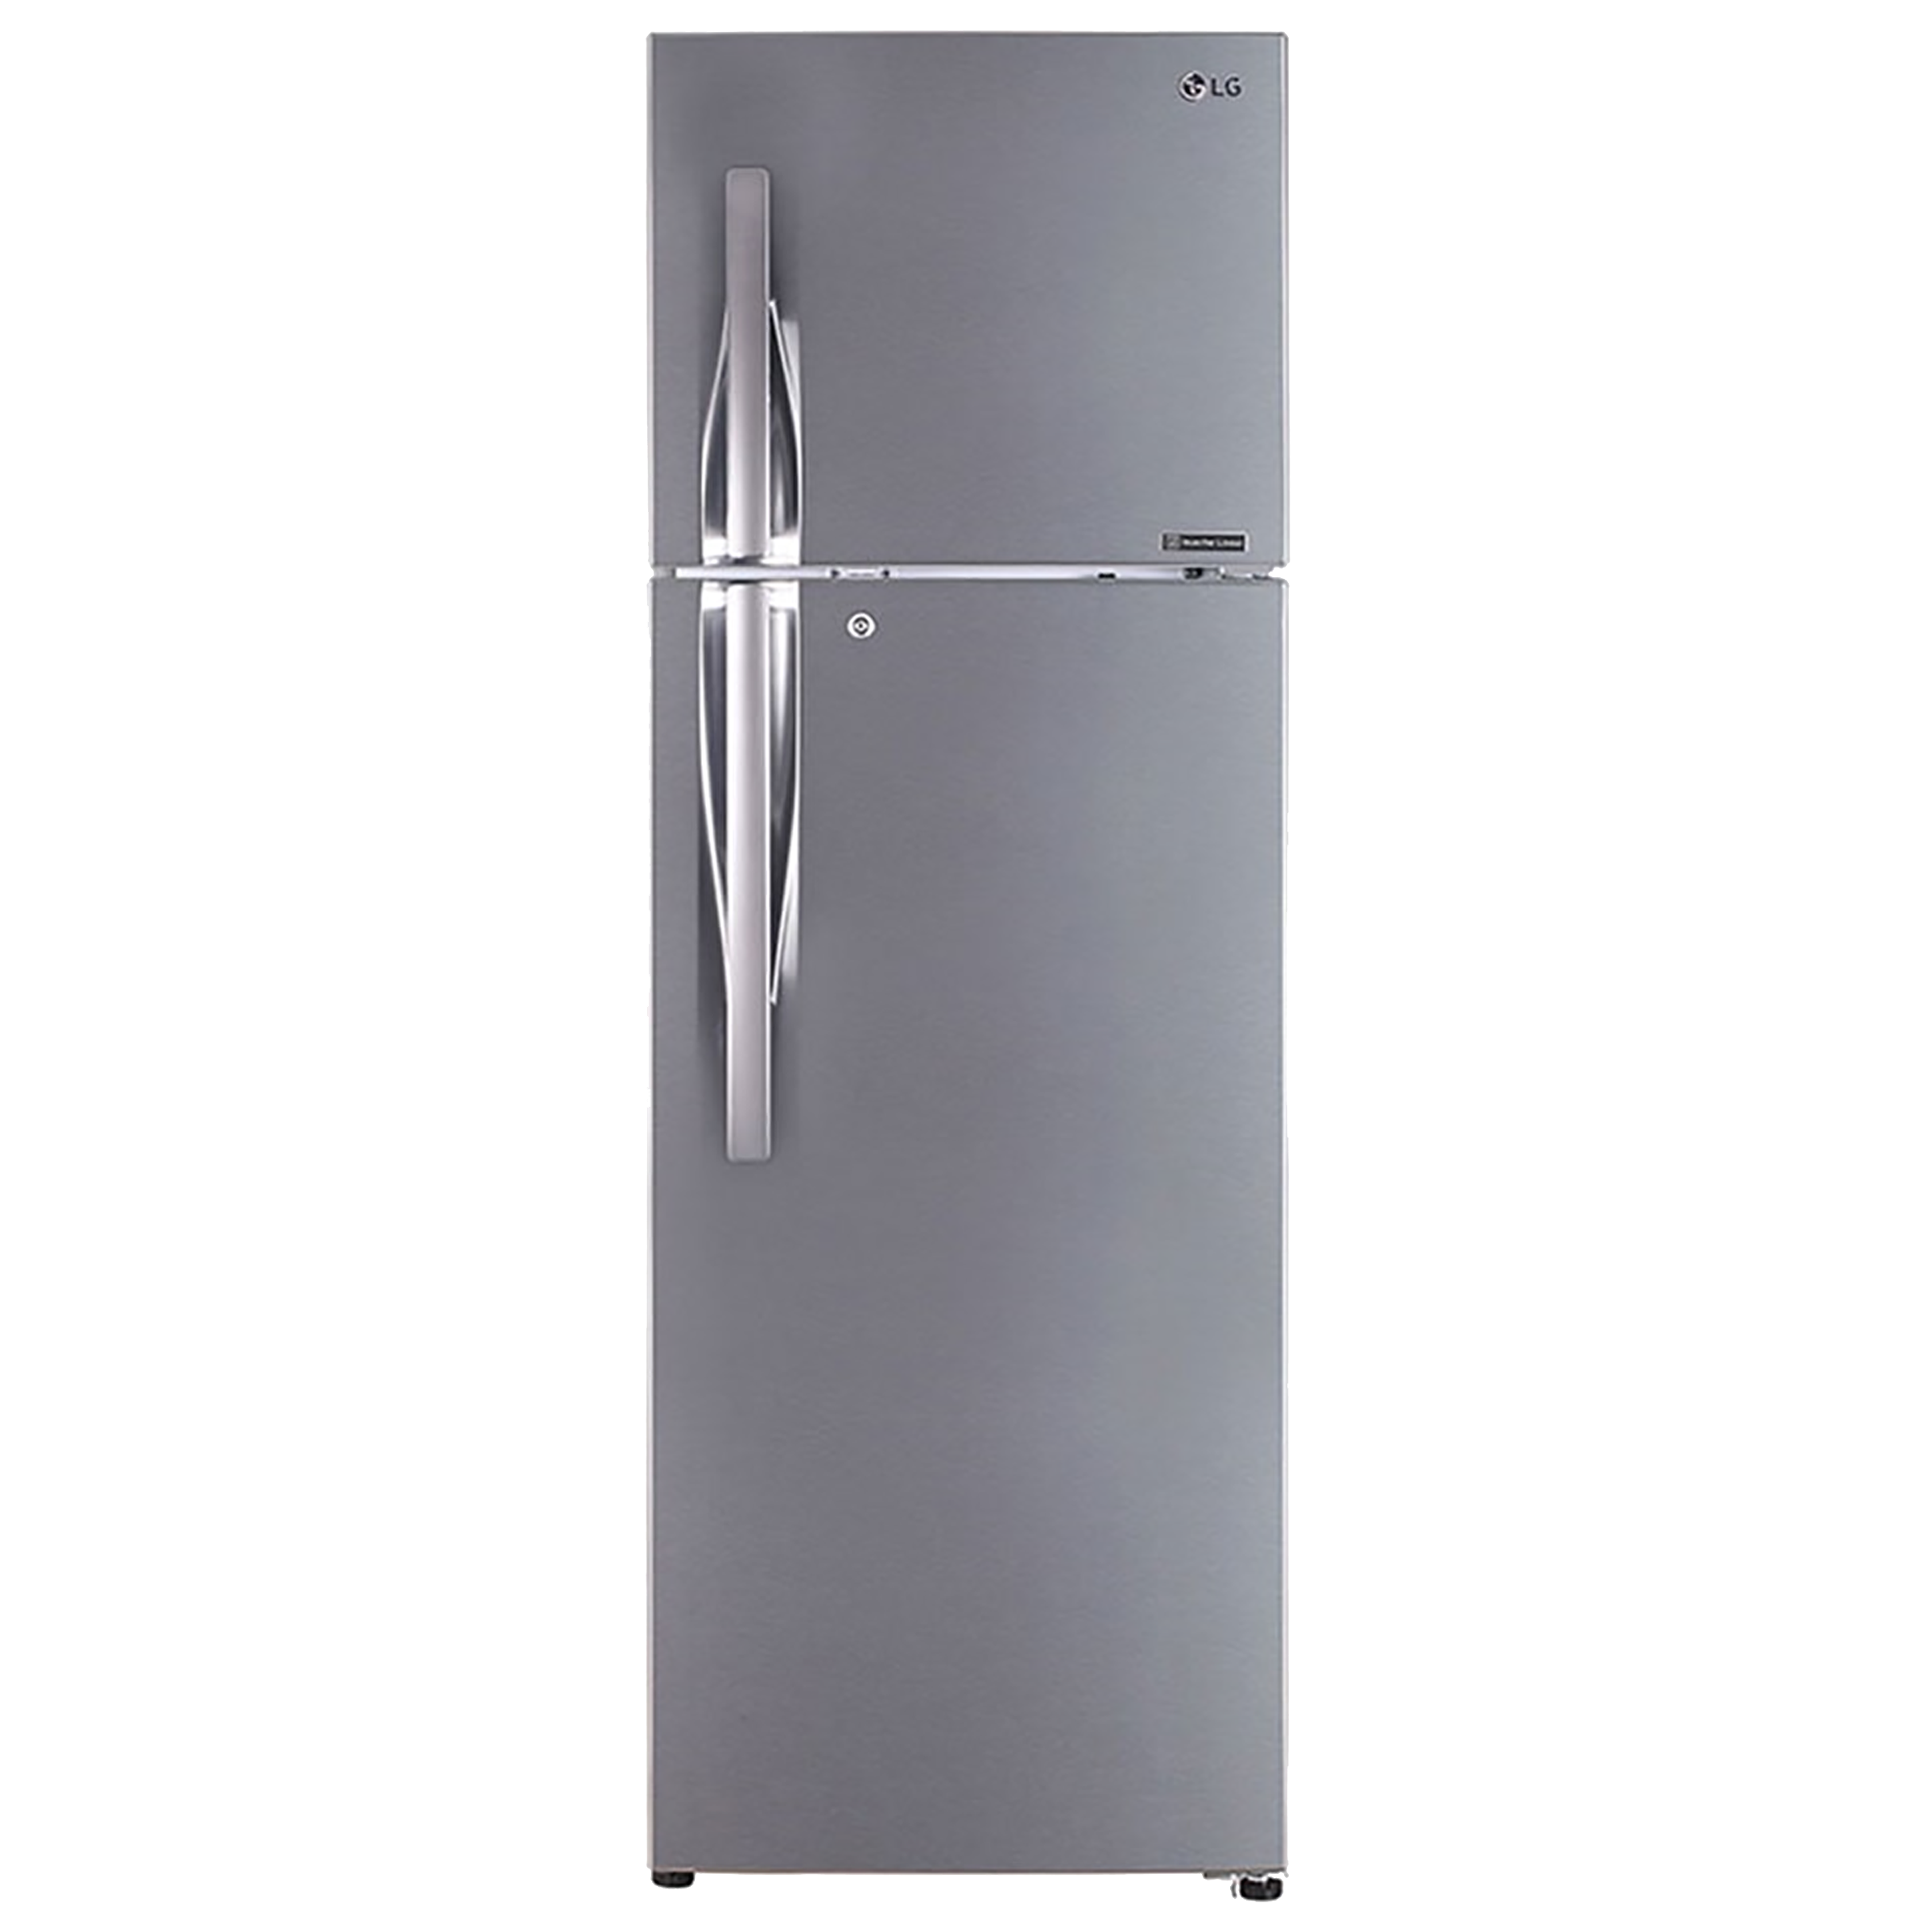 LG 360 Litres 3 Star Frost Free Inverter Double Door Refrigerator (Convertible Plus, GL-T402JPZN.EPZZEBN, Shiny Steel)_1